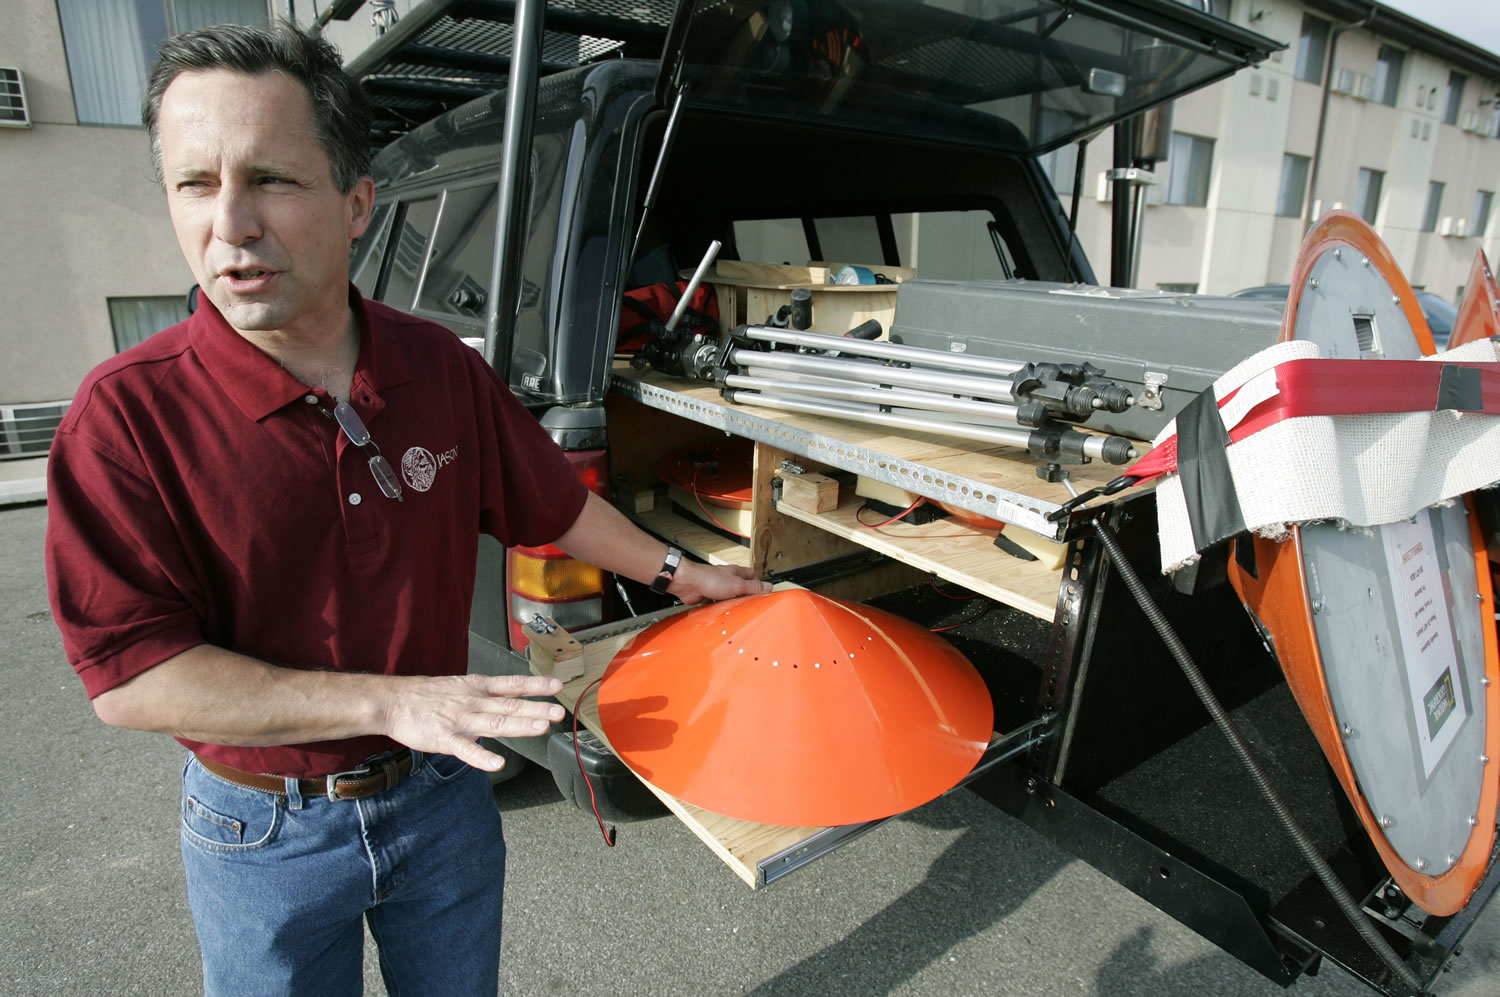 Tornado chaser Tim Samaras shows the probes he uses when trying to collect data in Ames, Iowa, in May 2006. Tim Samaras was killed along with his son, Paul Samaras, and another chaser, Carl Young,  on Friday in Oklahoma City.